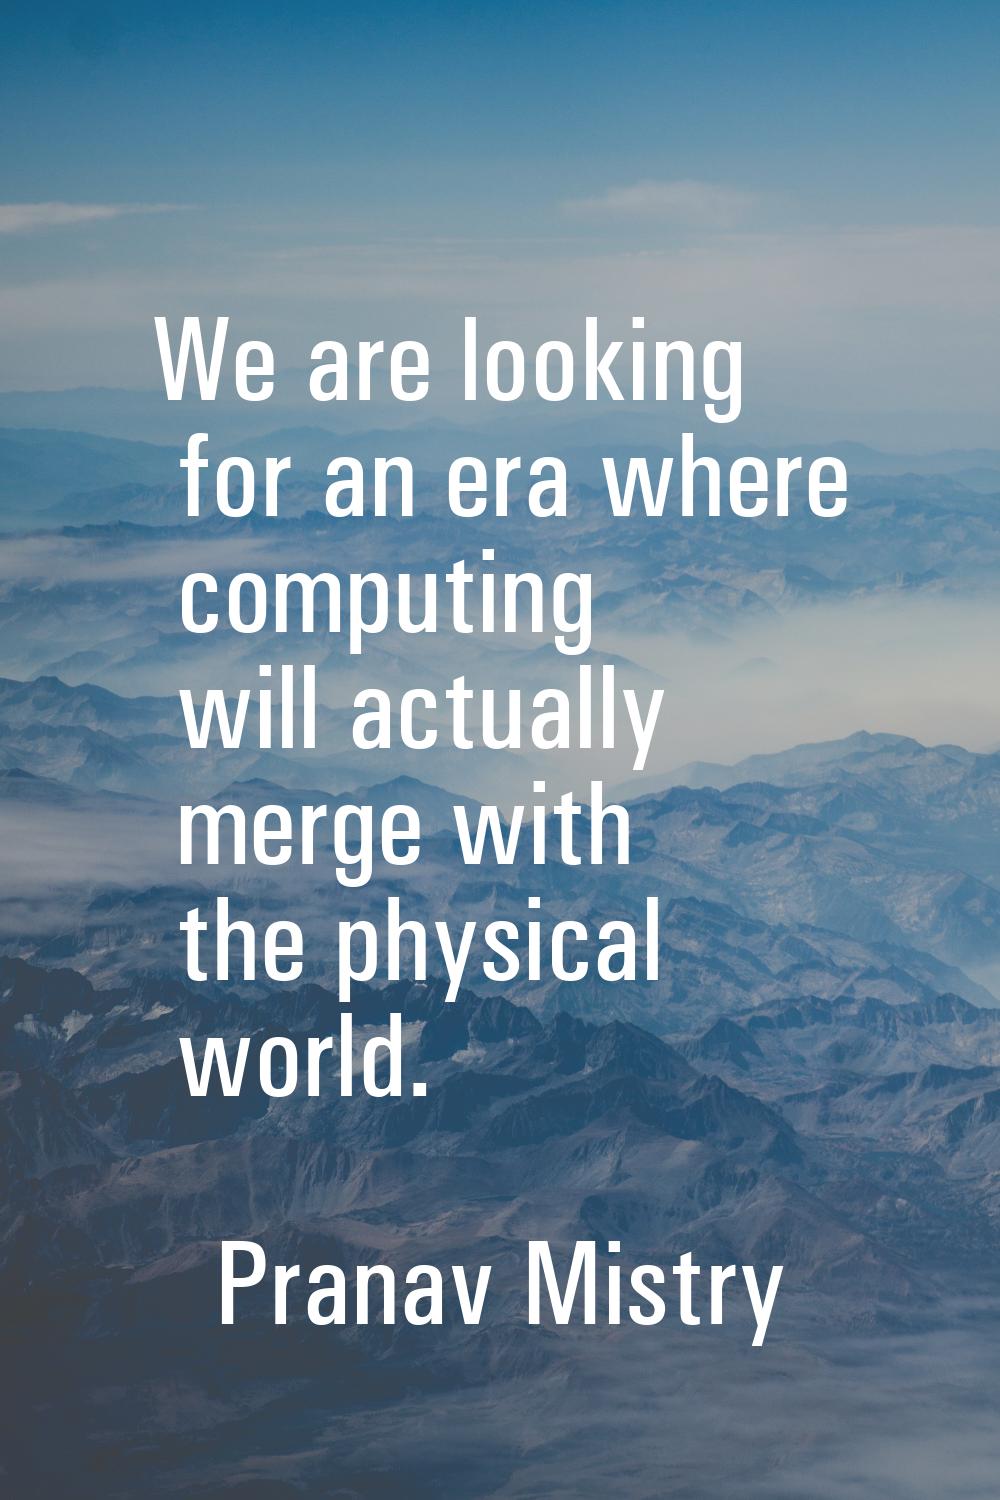 We are looking for an era where computing will actually merge with the physical world.